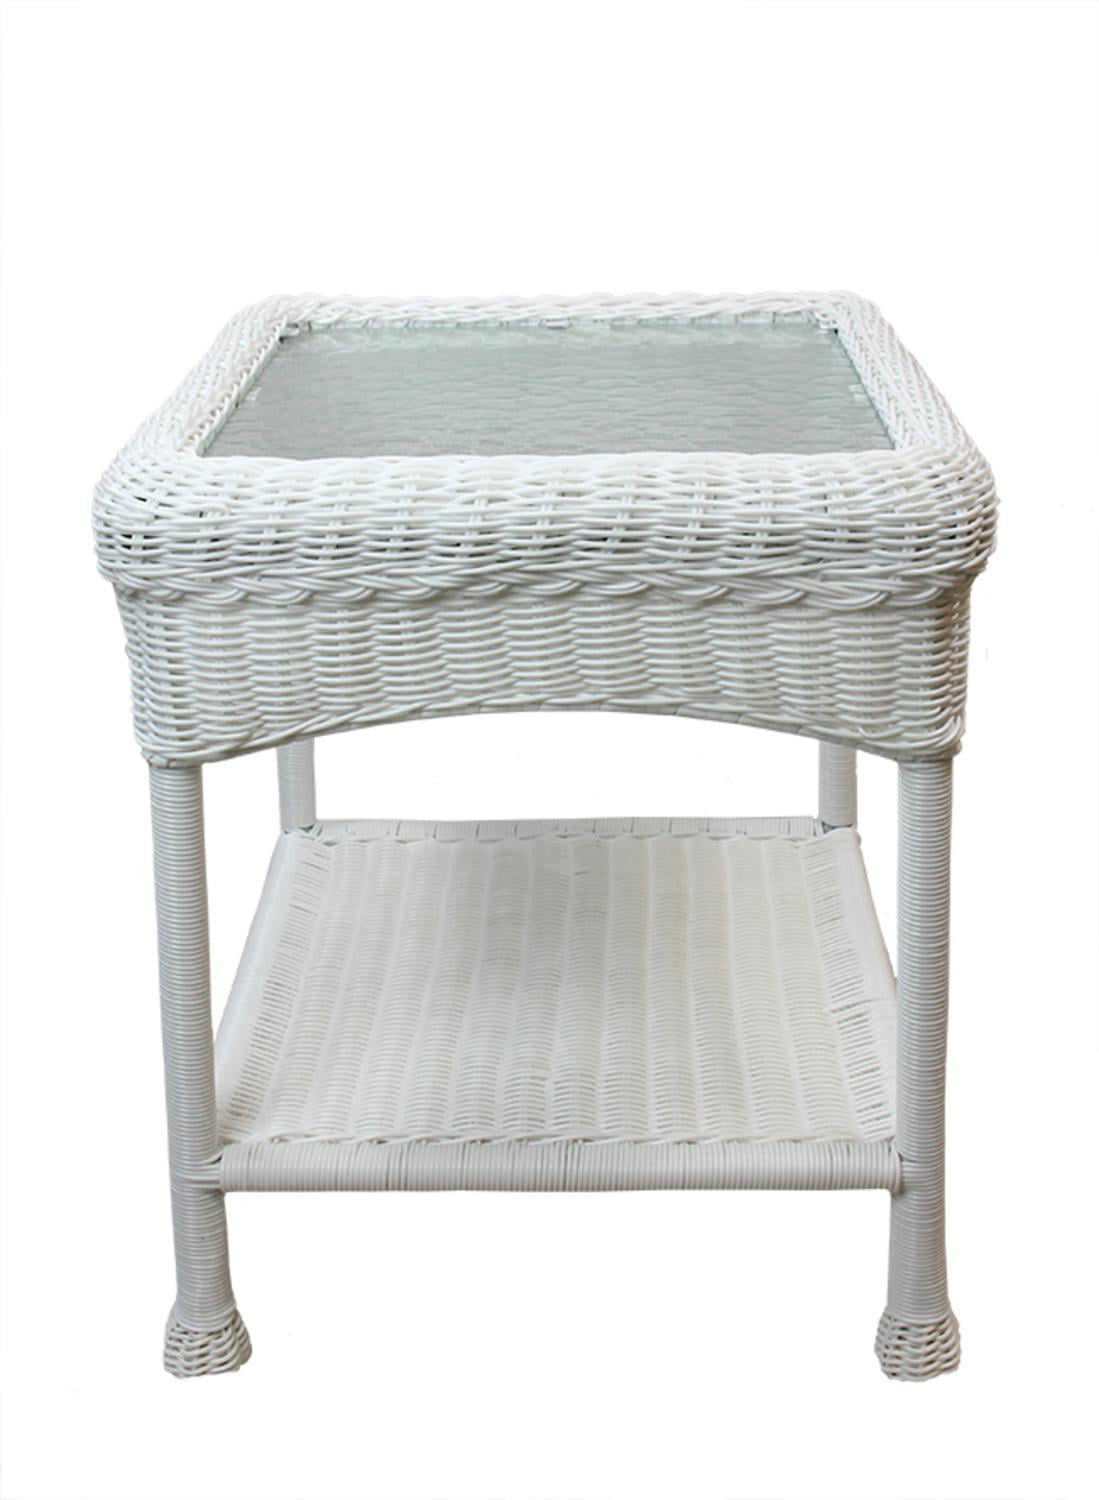 22" White Resin Wicker Outdoor Patio Side Table with Glass Top and